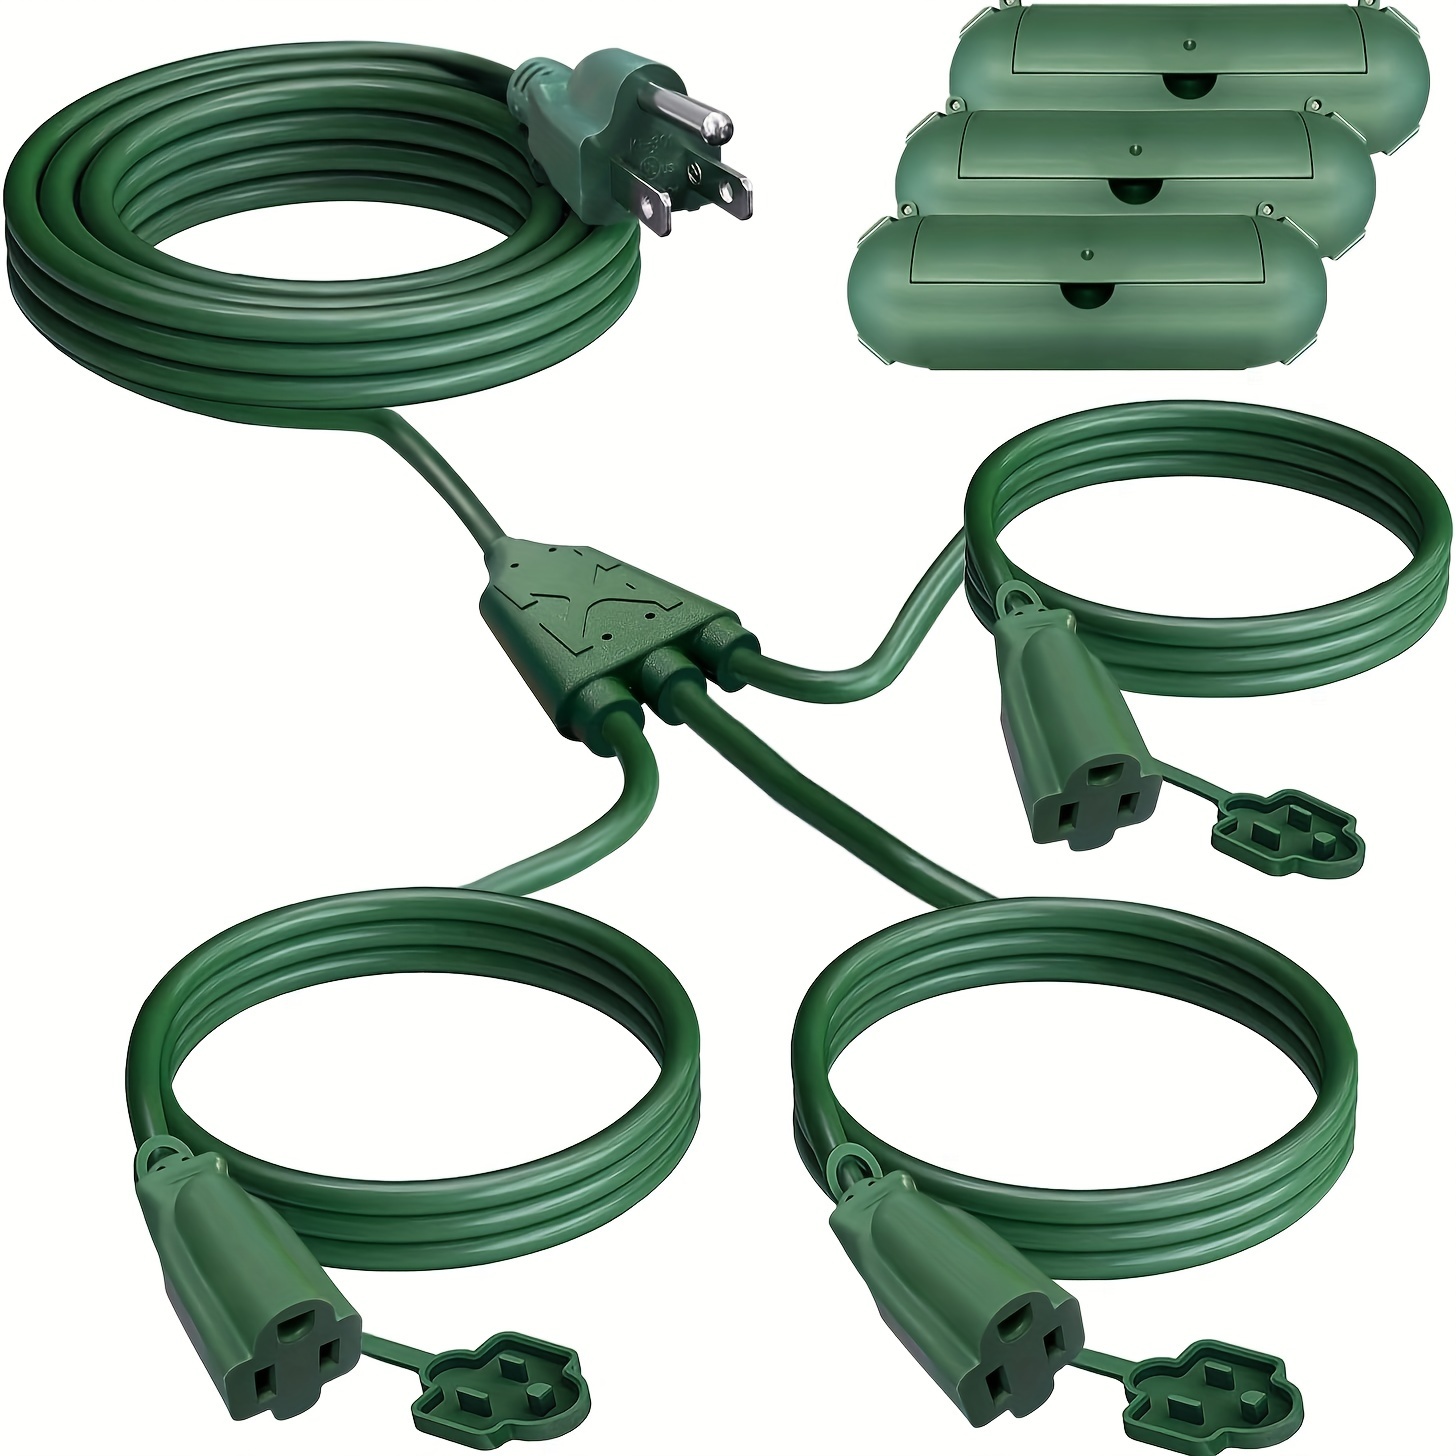 

Extension Cord 1 To 3 Splitter, Max 38ft End To End (50ft Total), With 3 Weatherproof Covers For Indoor And Outdoor, 16/3 Sjtw Weatherproof Wire For Holiday Decoration Light, Ul Listed, Green